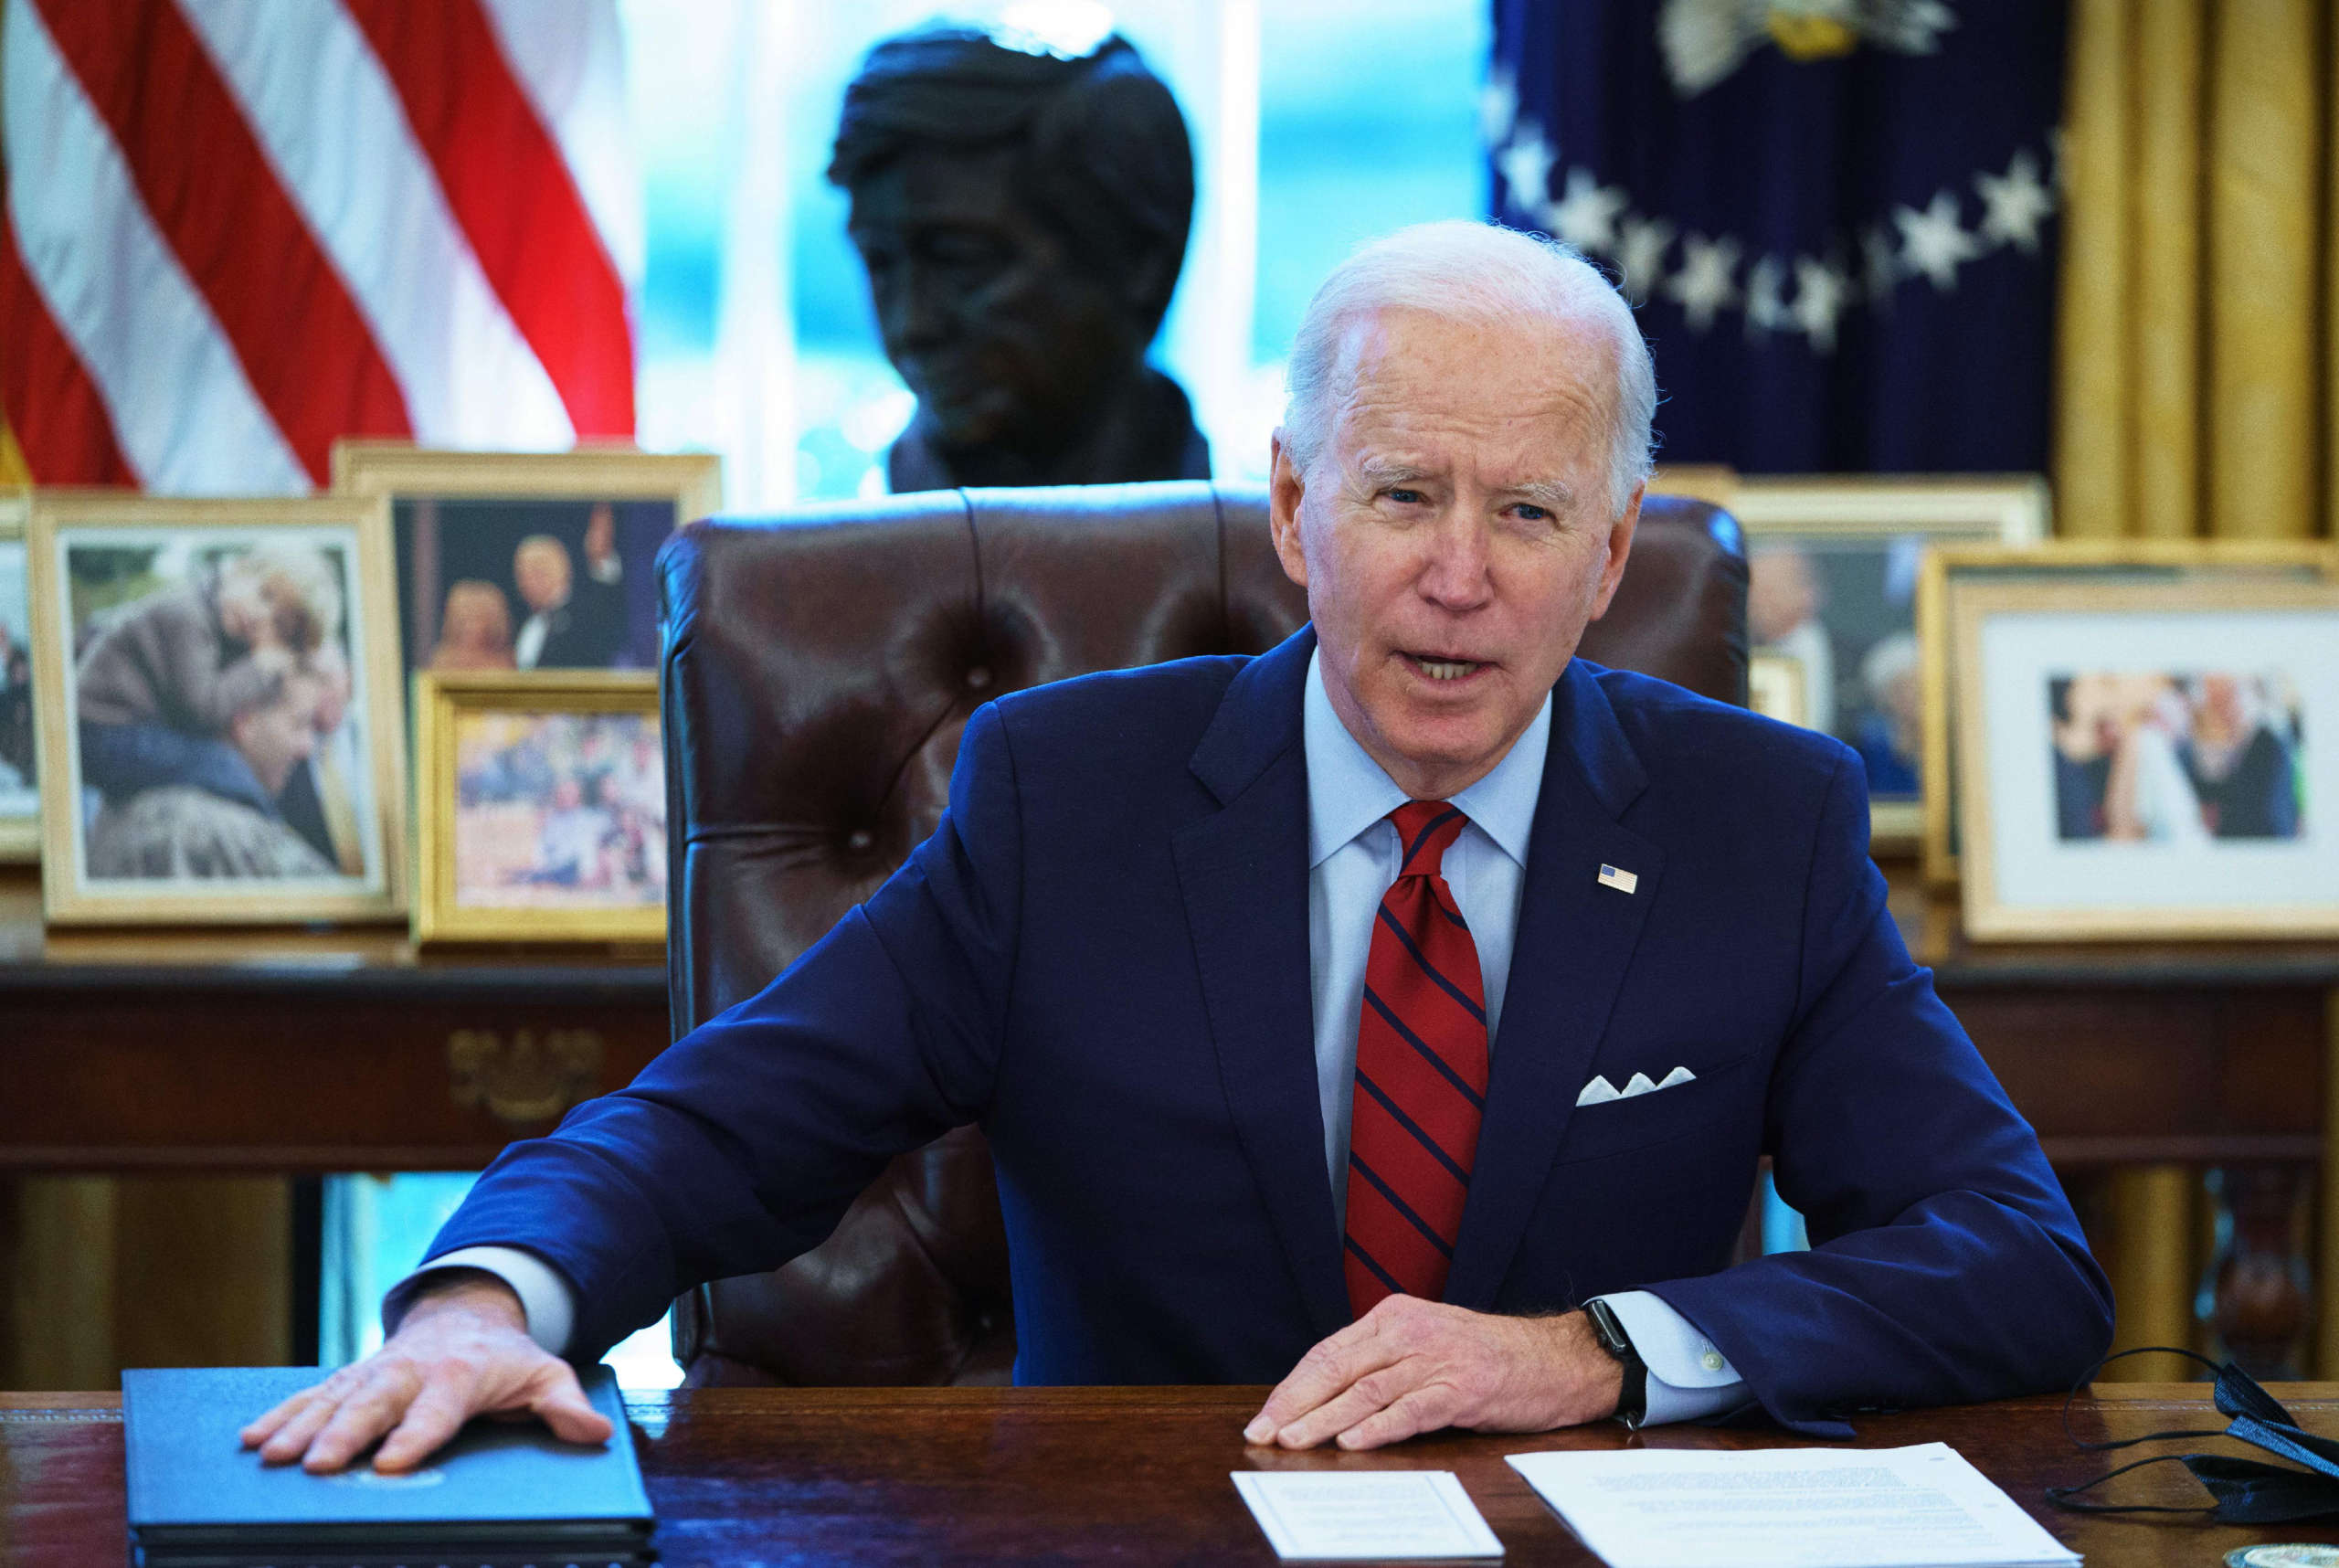 Polls Show Support for Biden's Executive Orders, as Progressives Push for More